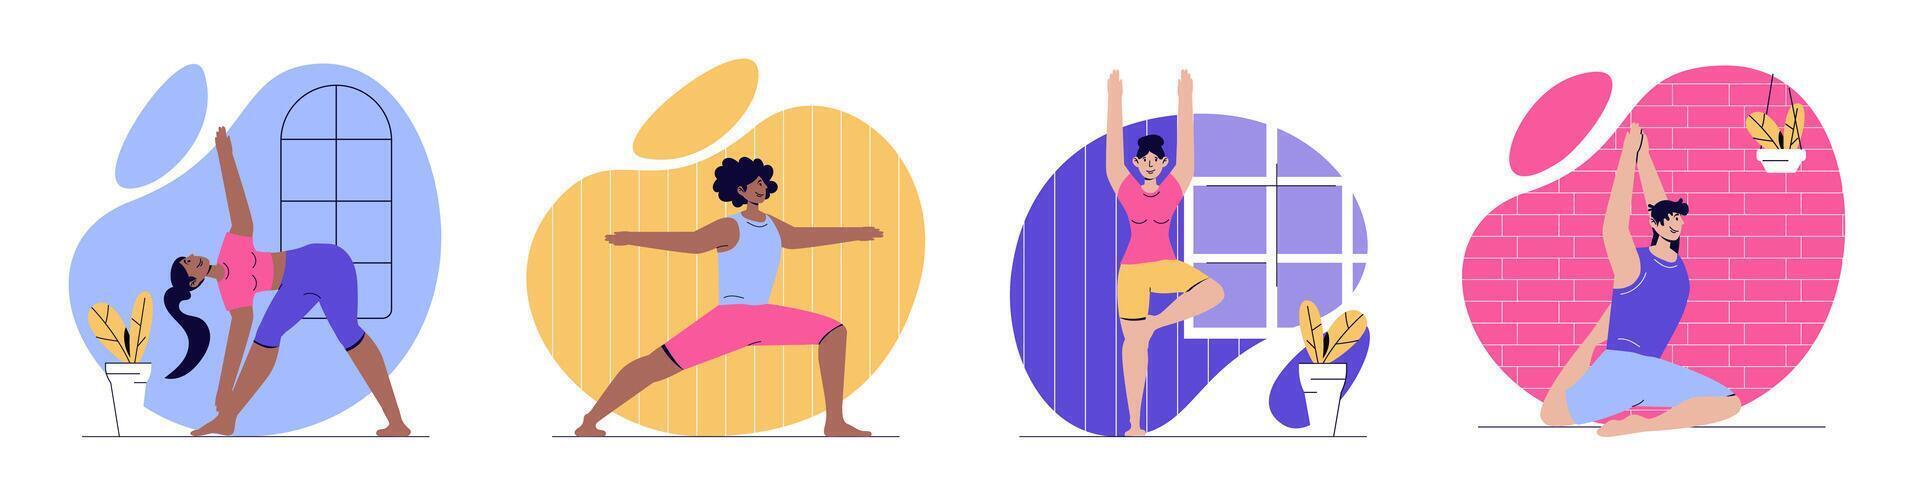 Yoga training concept with people scenes set in flat web design. Bundle of character situations with men and women practicing asanas, doing pilates and gymnastic exercises. Vector illustrations.